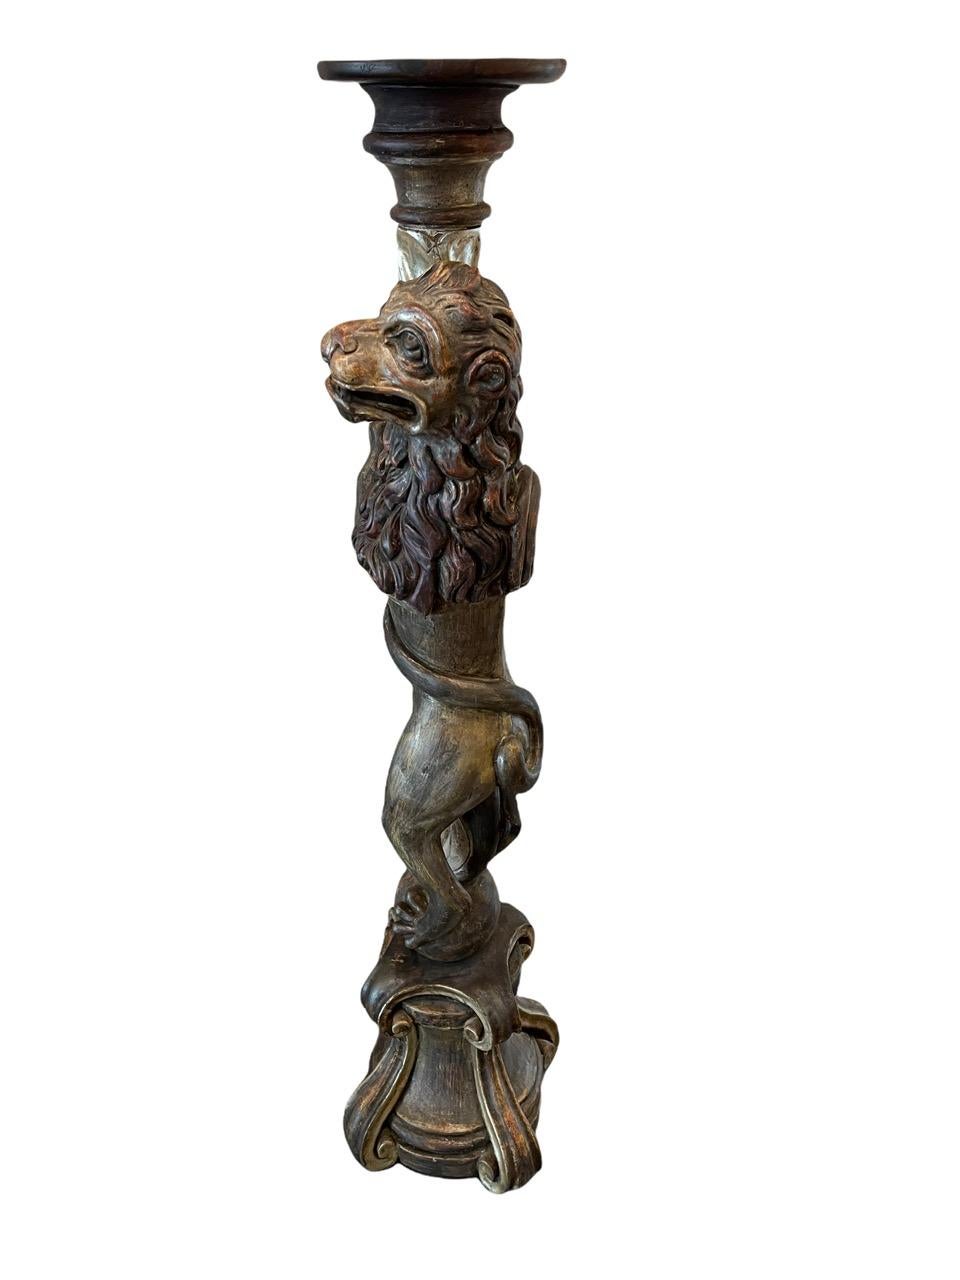 19th Century Russian Empire Carved Wood Candle Holder Sculpture For Sale 6